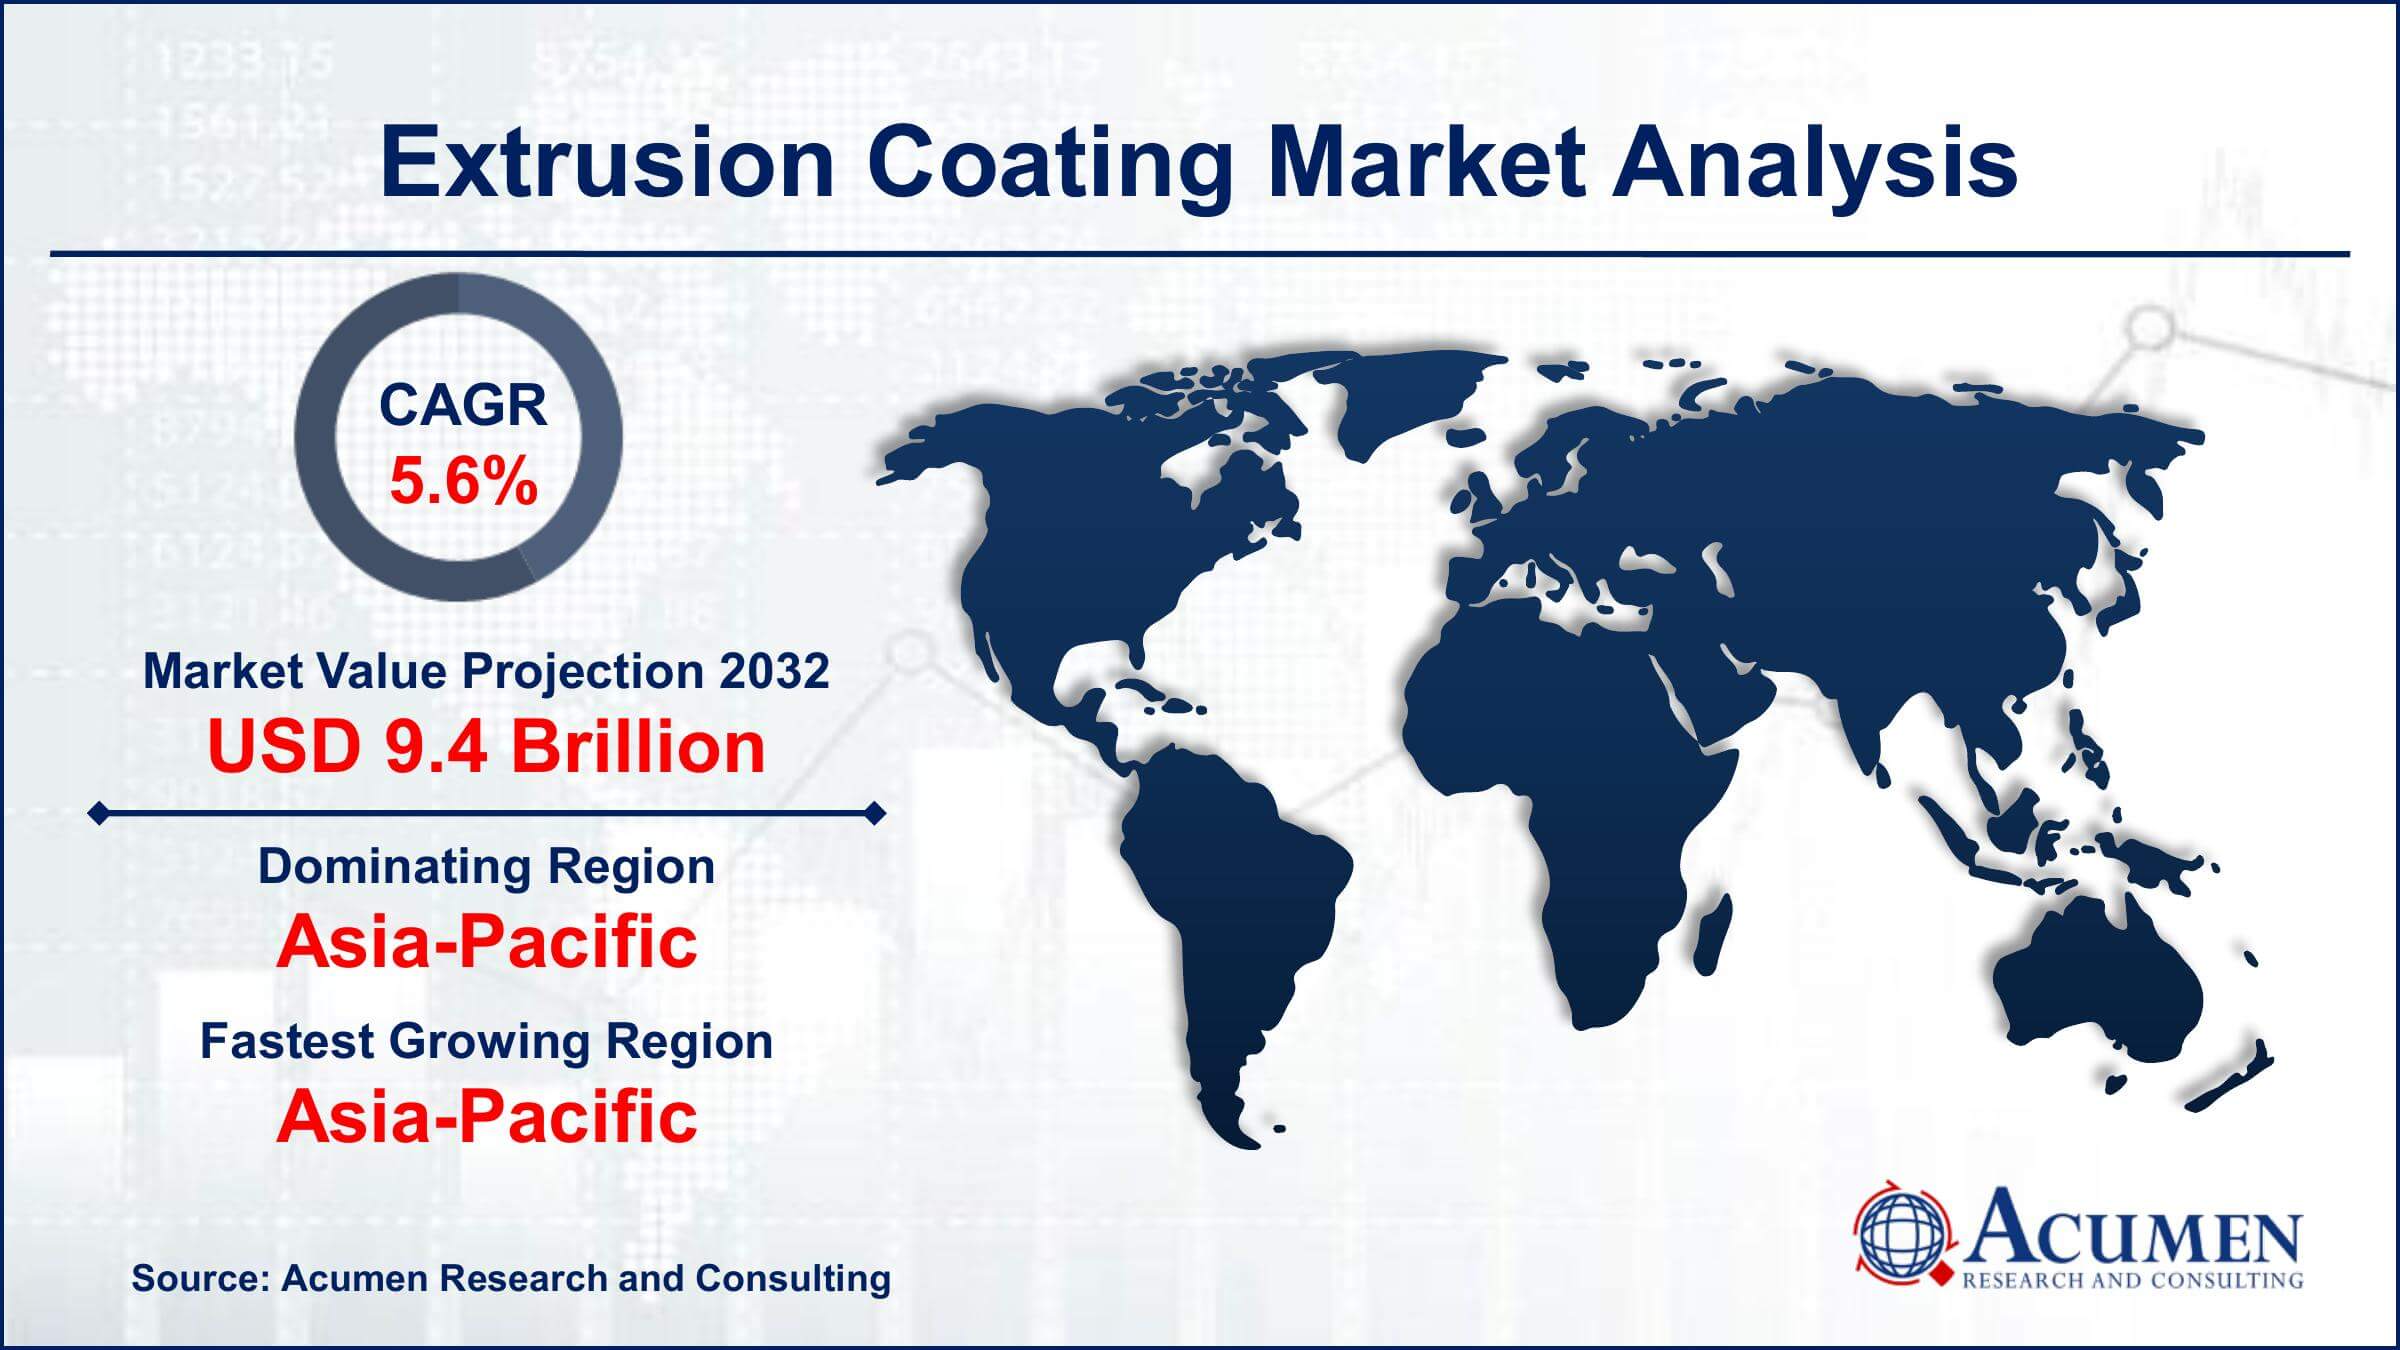 Global Extrusion Coating Market Trends